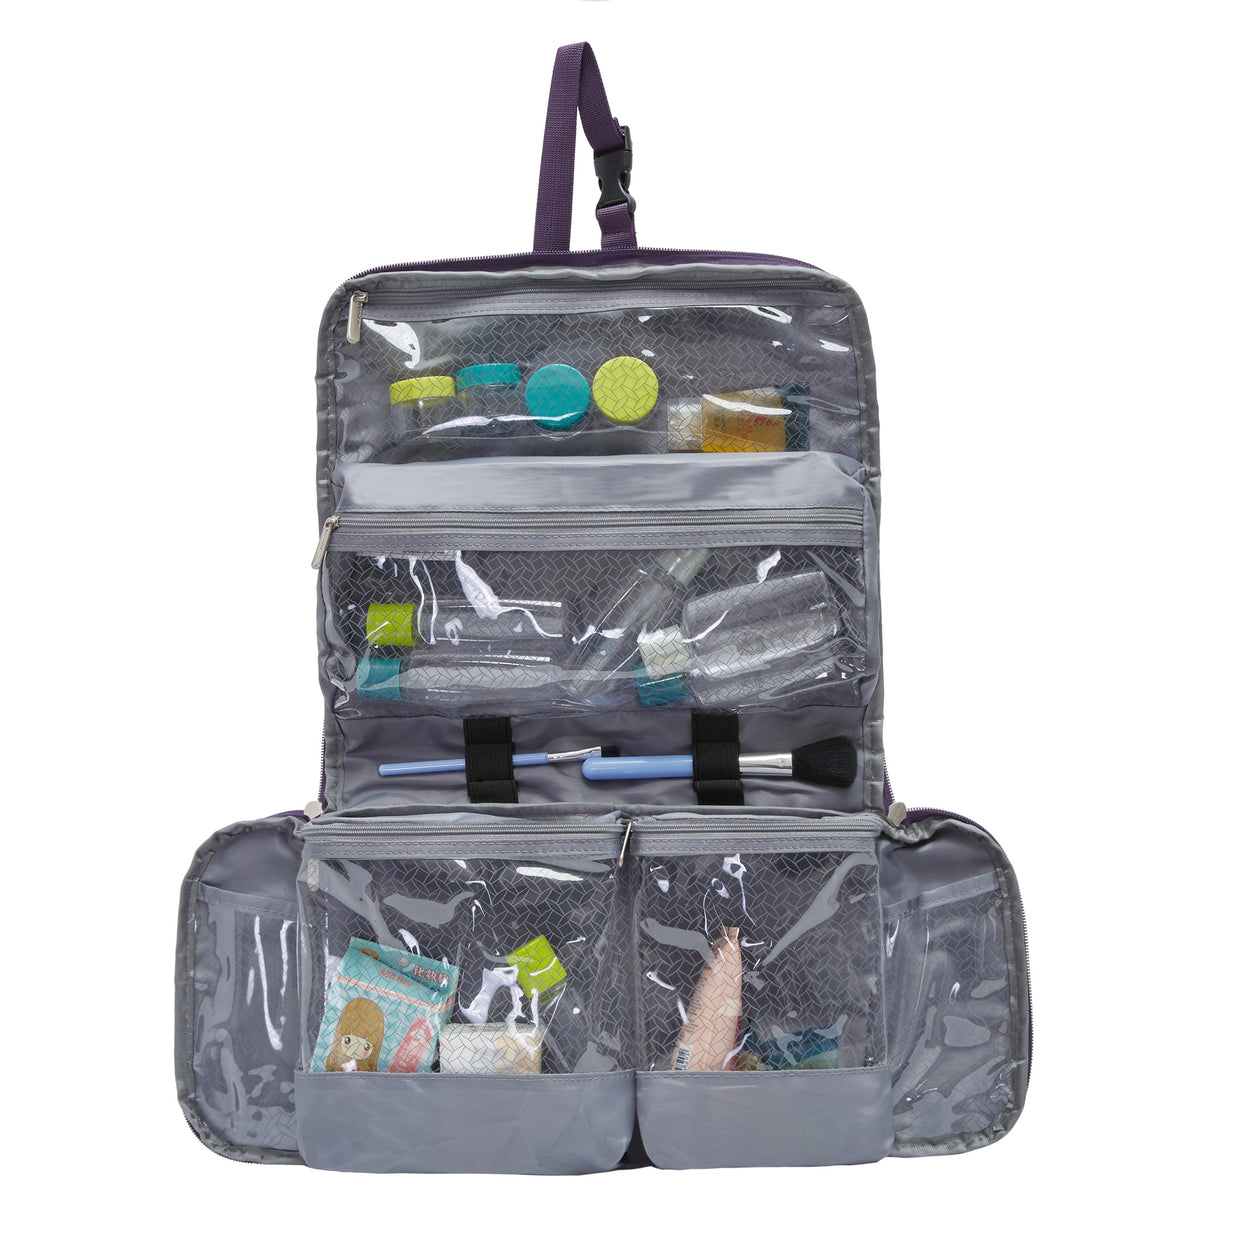 AAA.com l Travelon Flat-Out Hanging Toiletry Kit